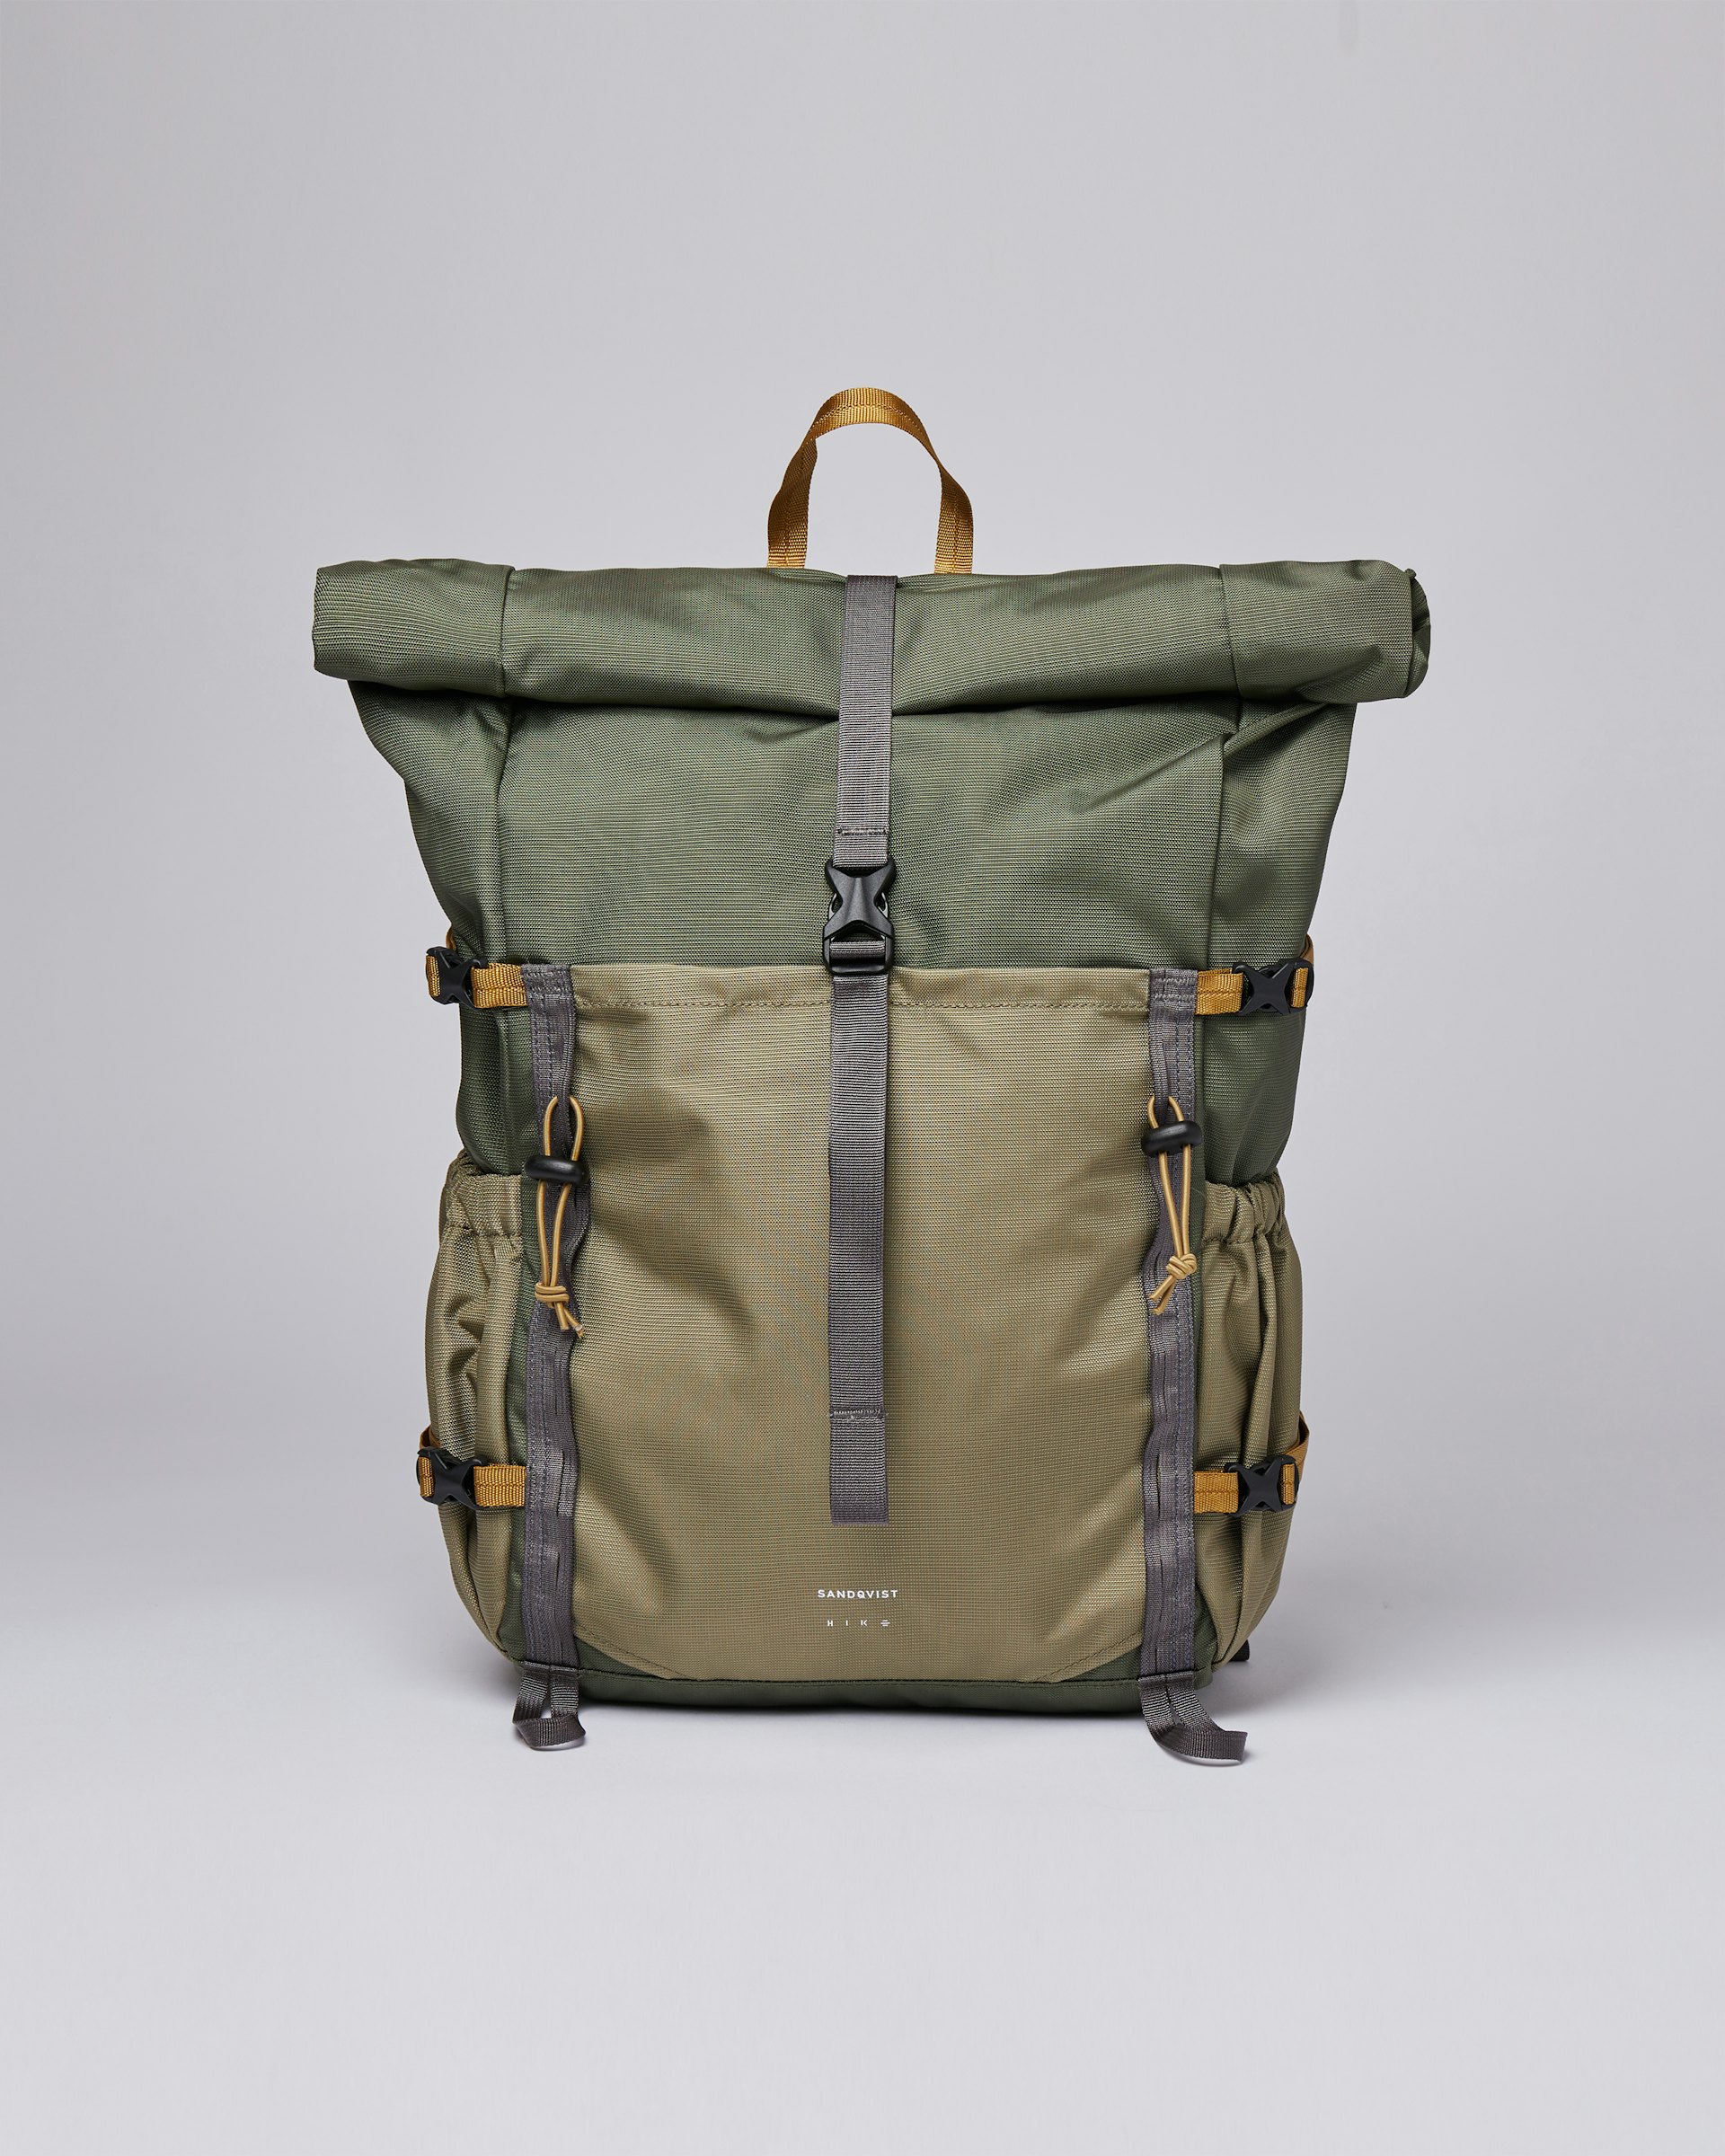 Forest Hike belongs to the category Backpacks and is in color green